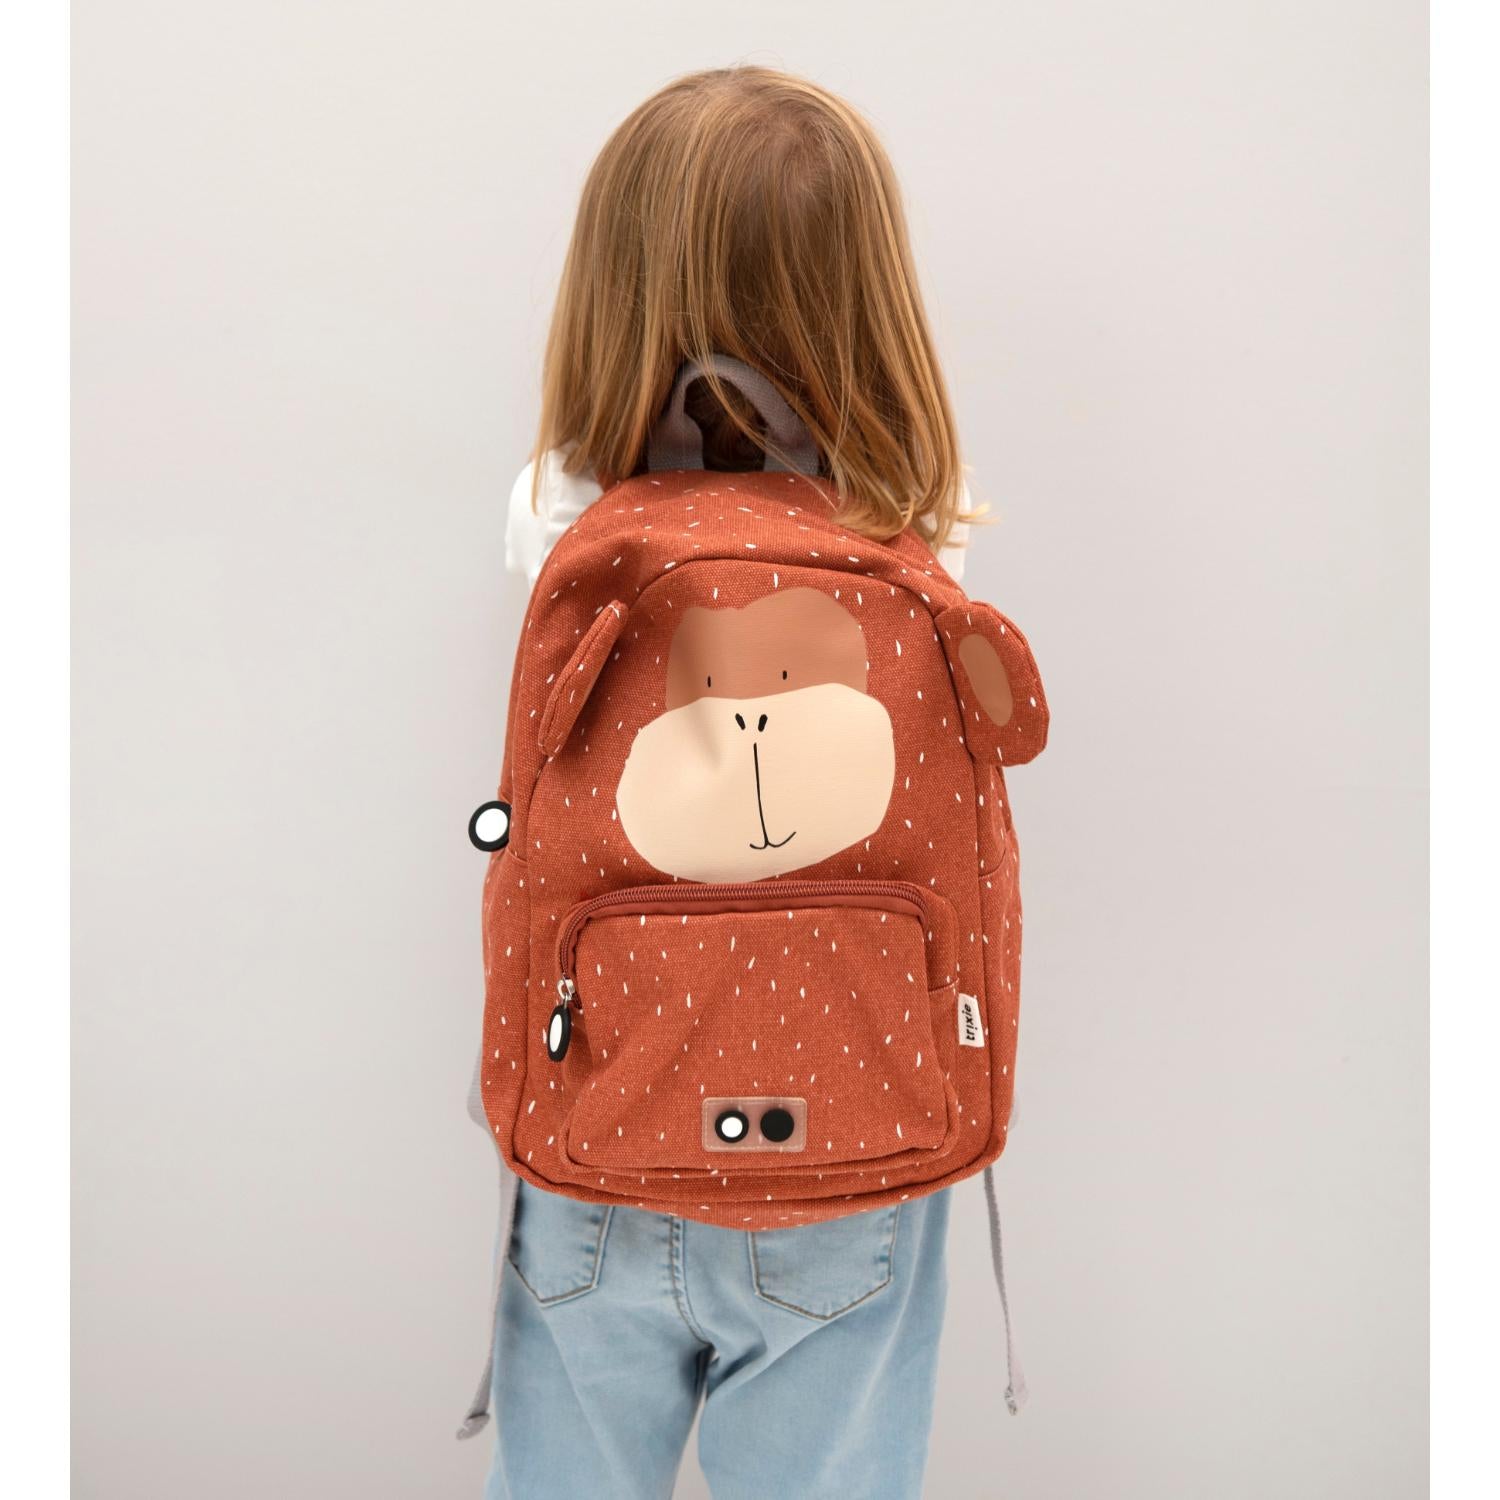 Trixie Mr. Monkey Backpack | Kid’s Backpack for Creche, Nursery & School | Lifestyle: Child with Backpack - Back View | BeoVERDE.ie